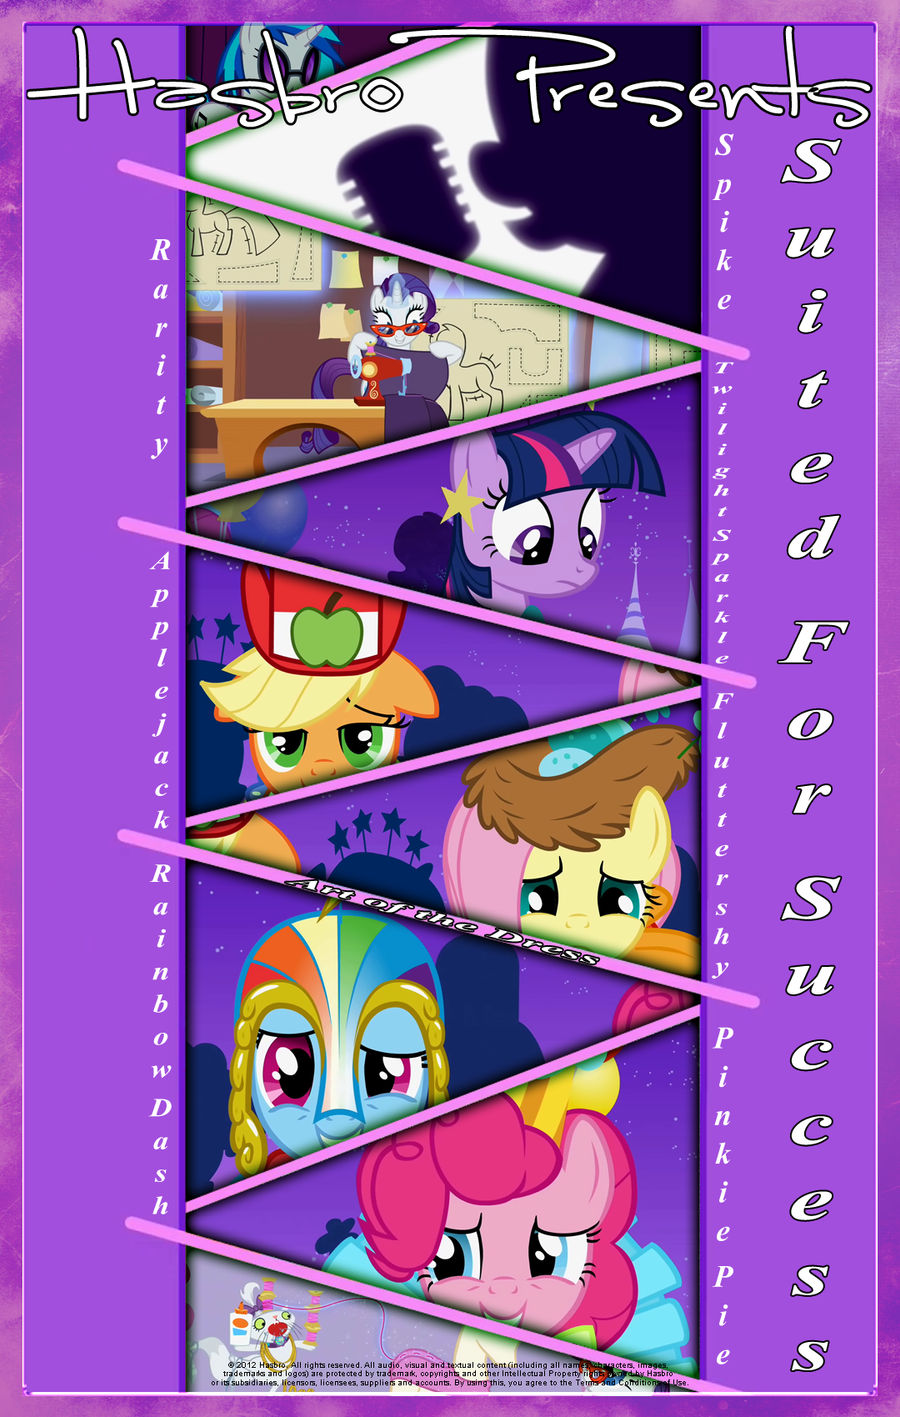 mlp___suited_for_success___movie_poster_by_pims1978-d54o2l3.png